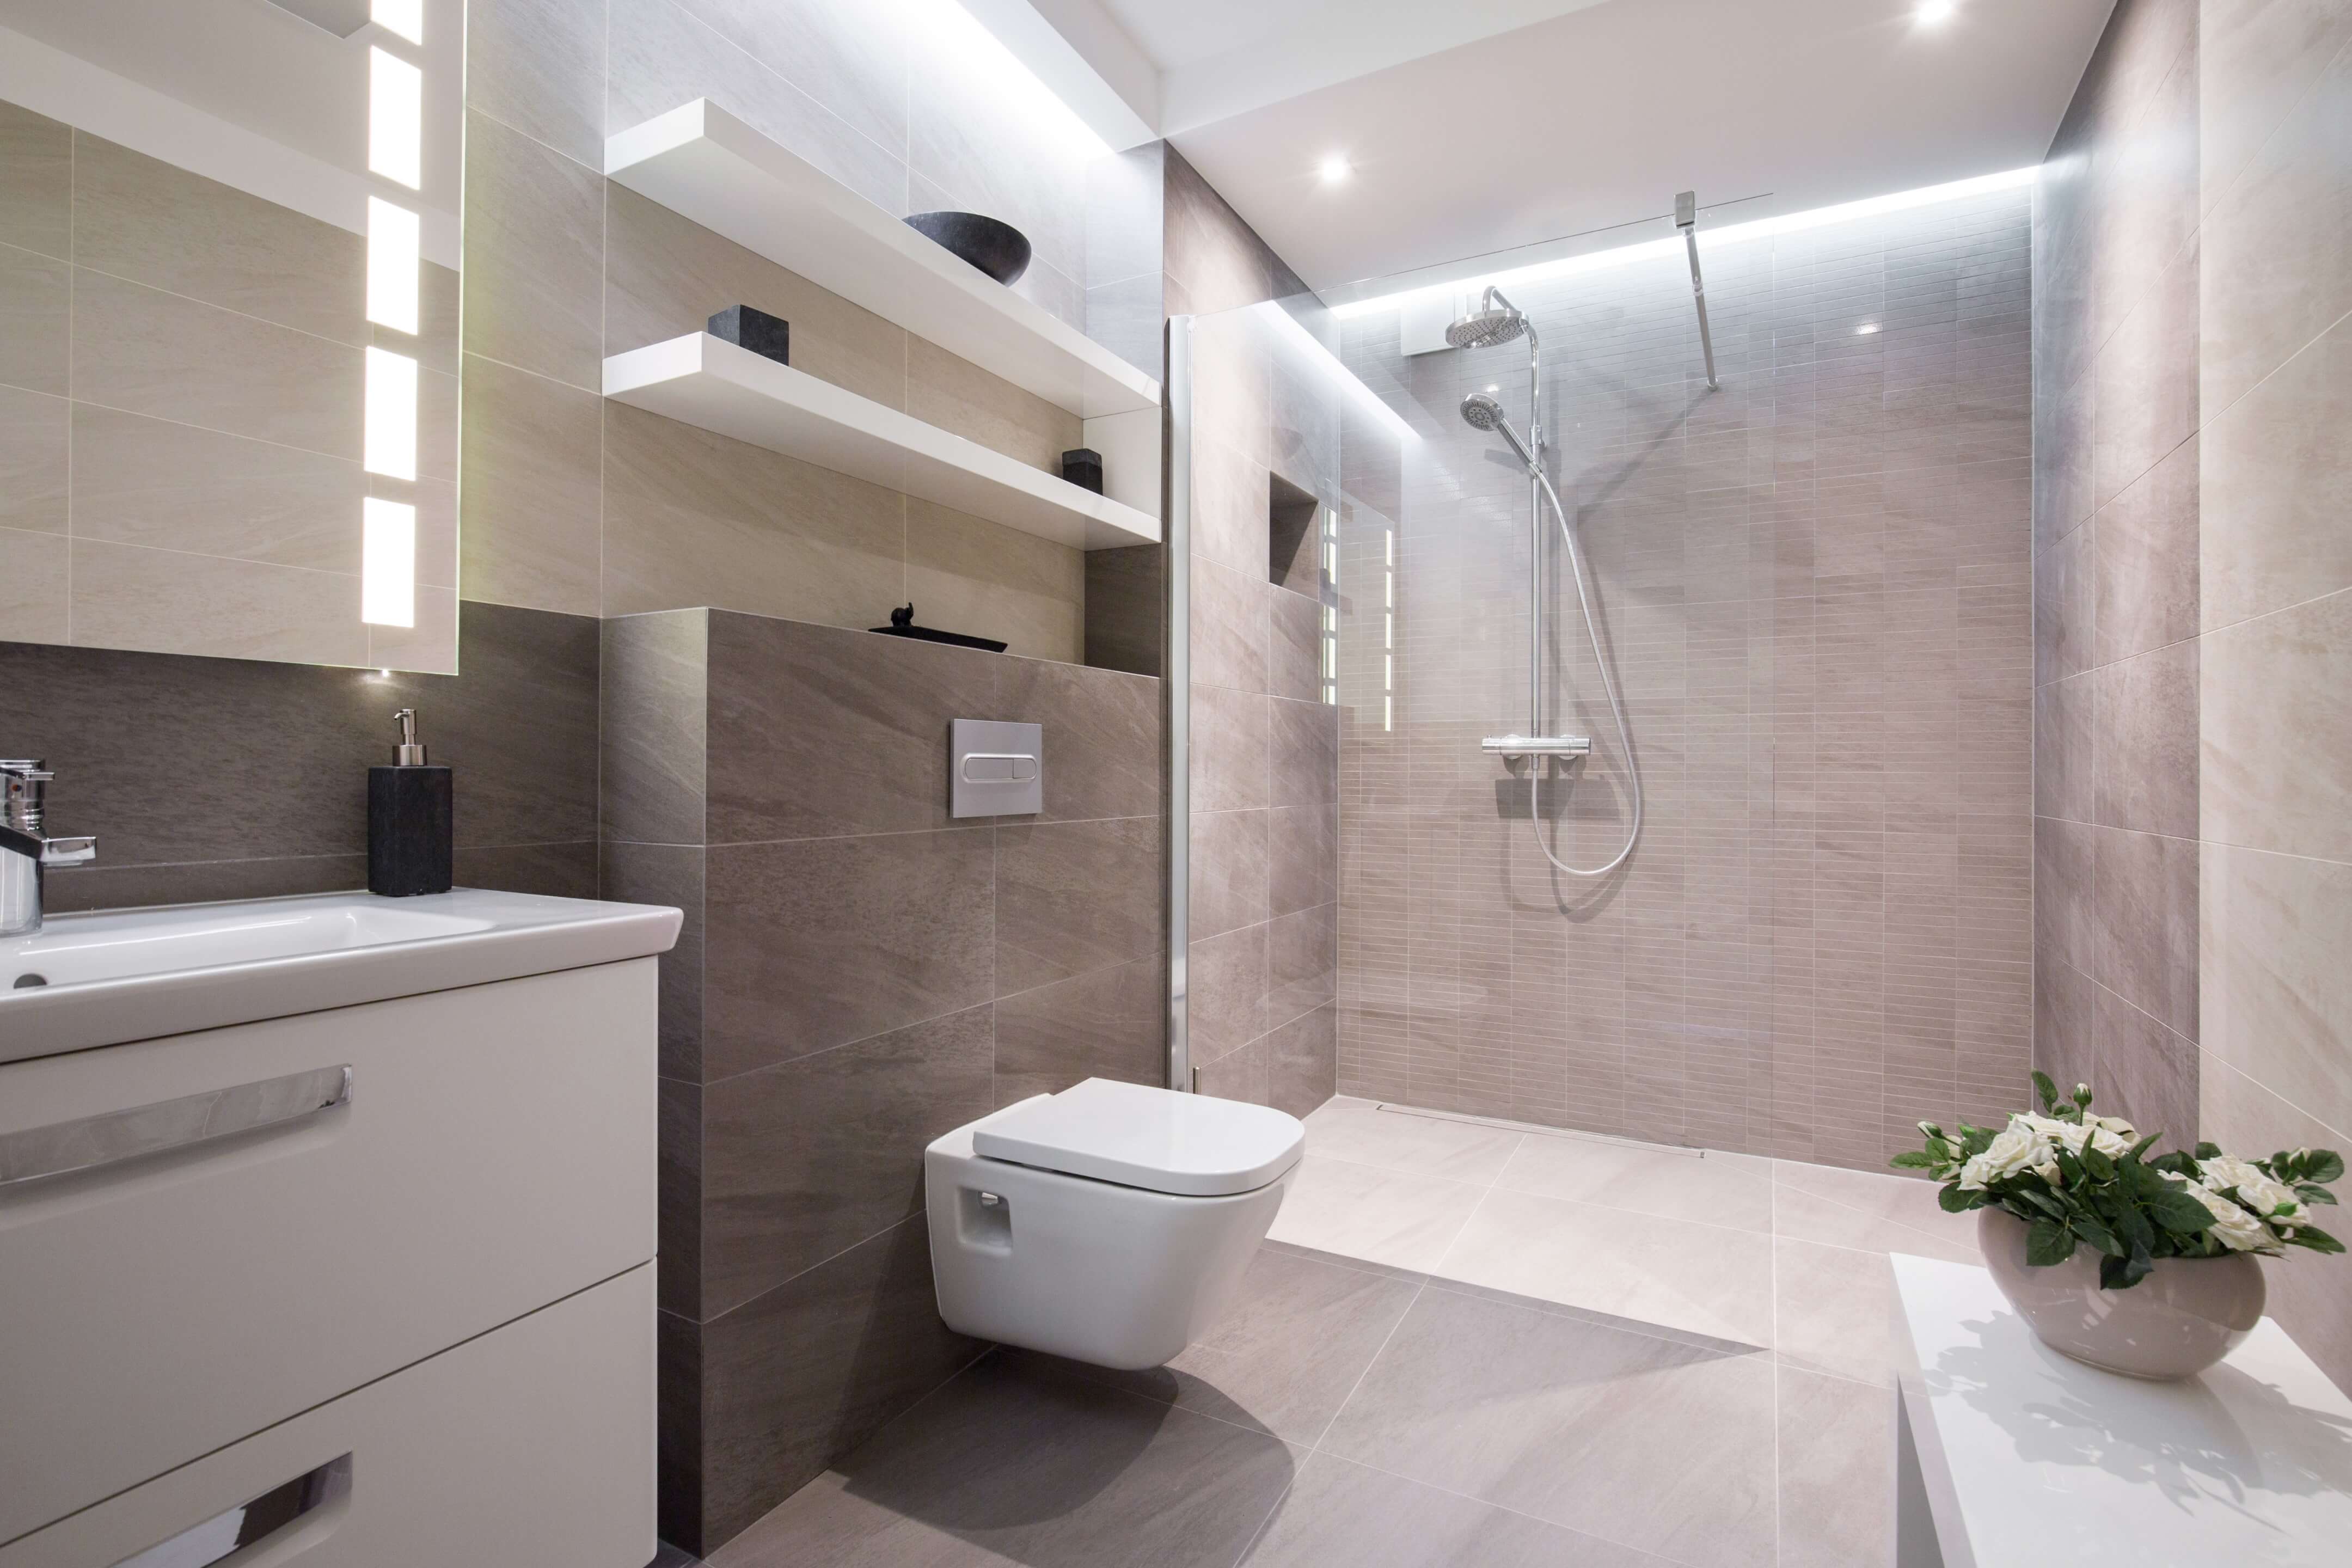 local bathroom fitters kingston upon thames